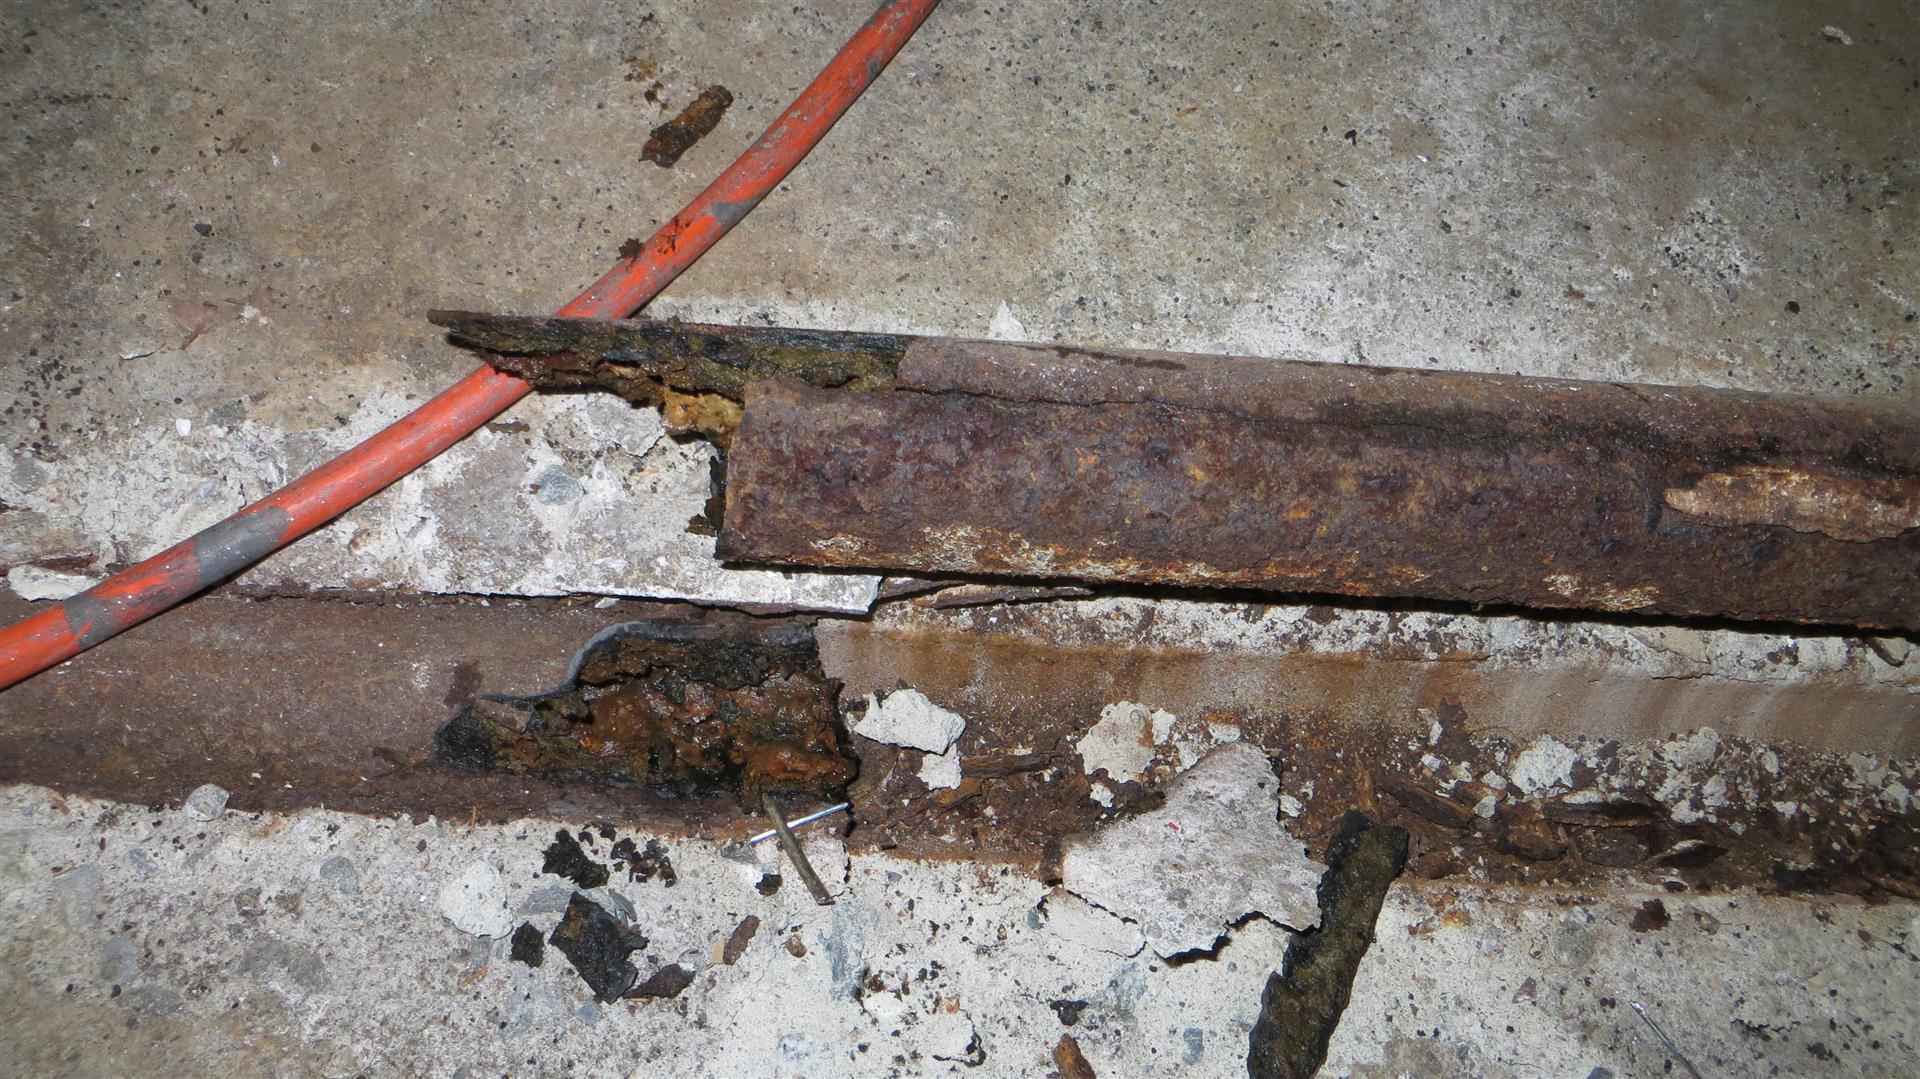 This cast iron horizontal waste pipe was fractured, rusted, and 2/3 plugged.